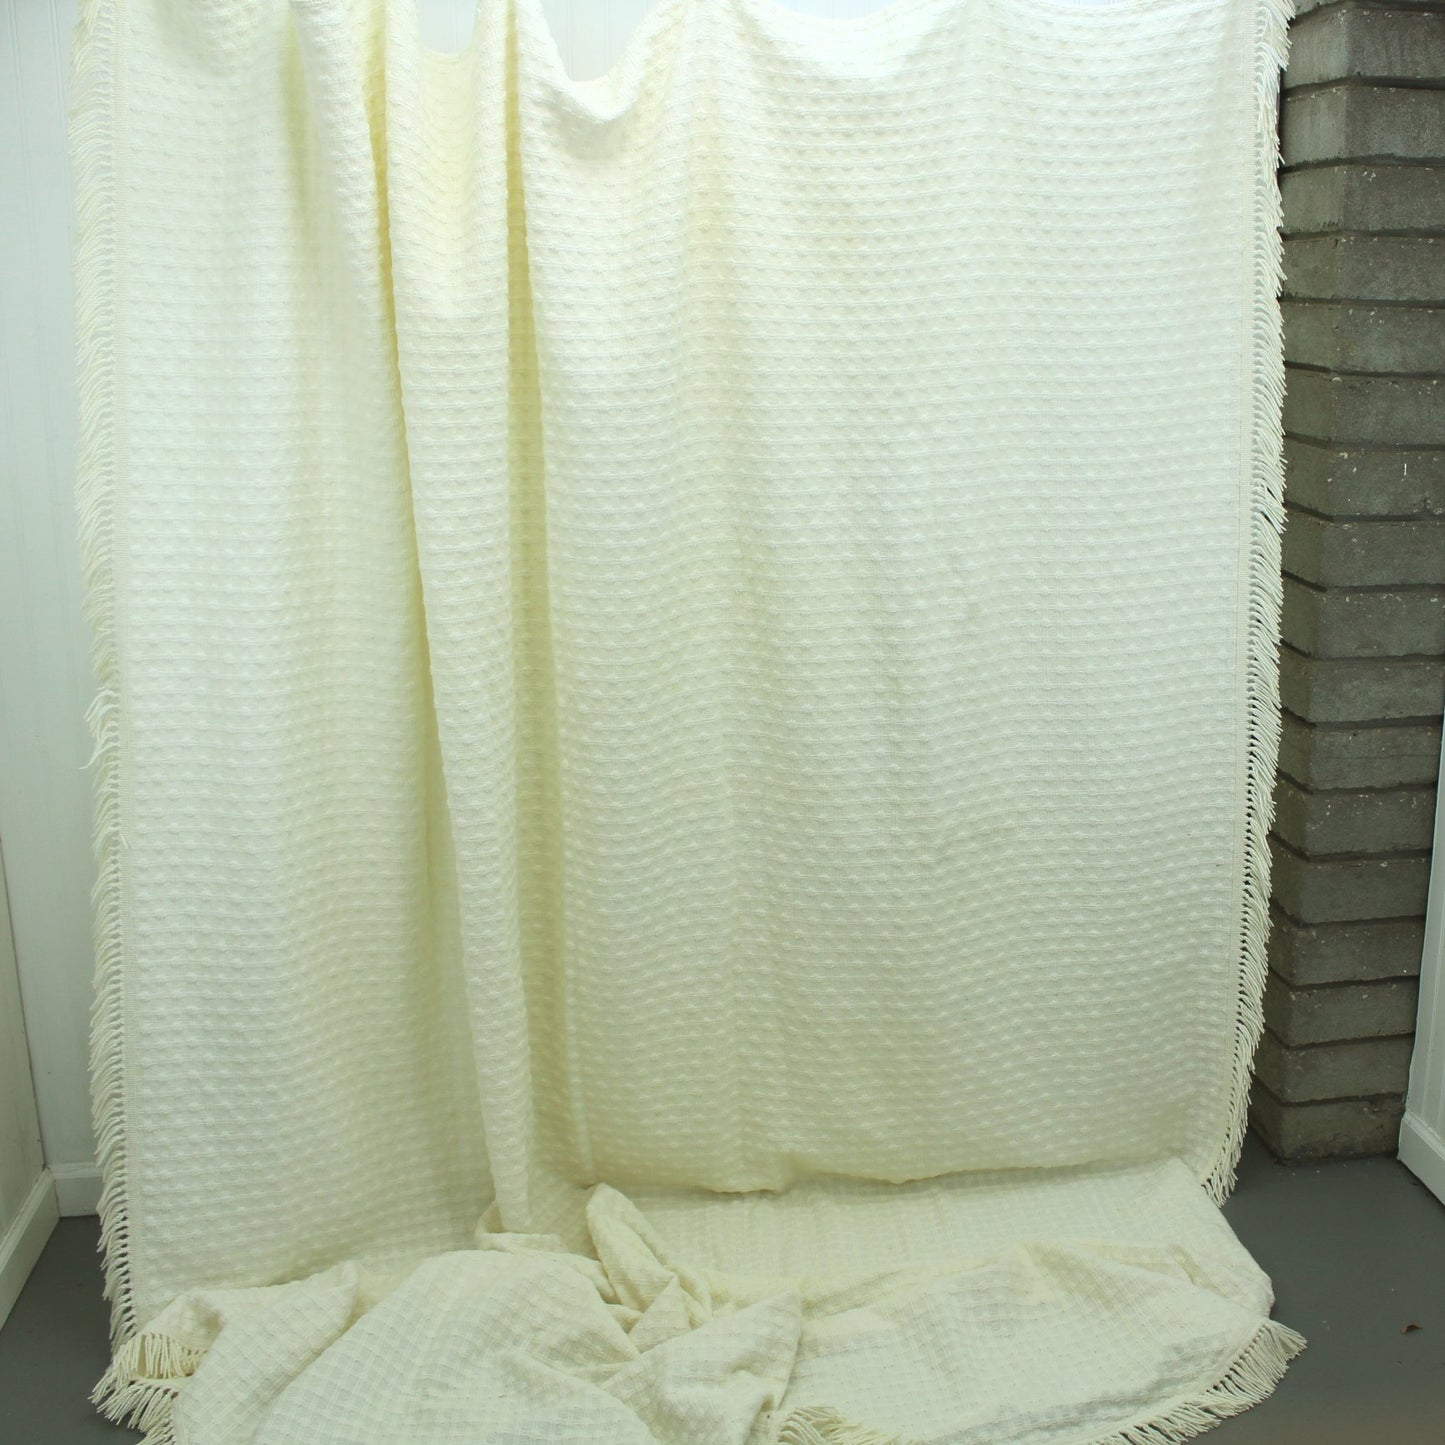 Woven Cotton Bedspread Off White Ivory Basket Weave Design full view of bed cover